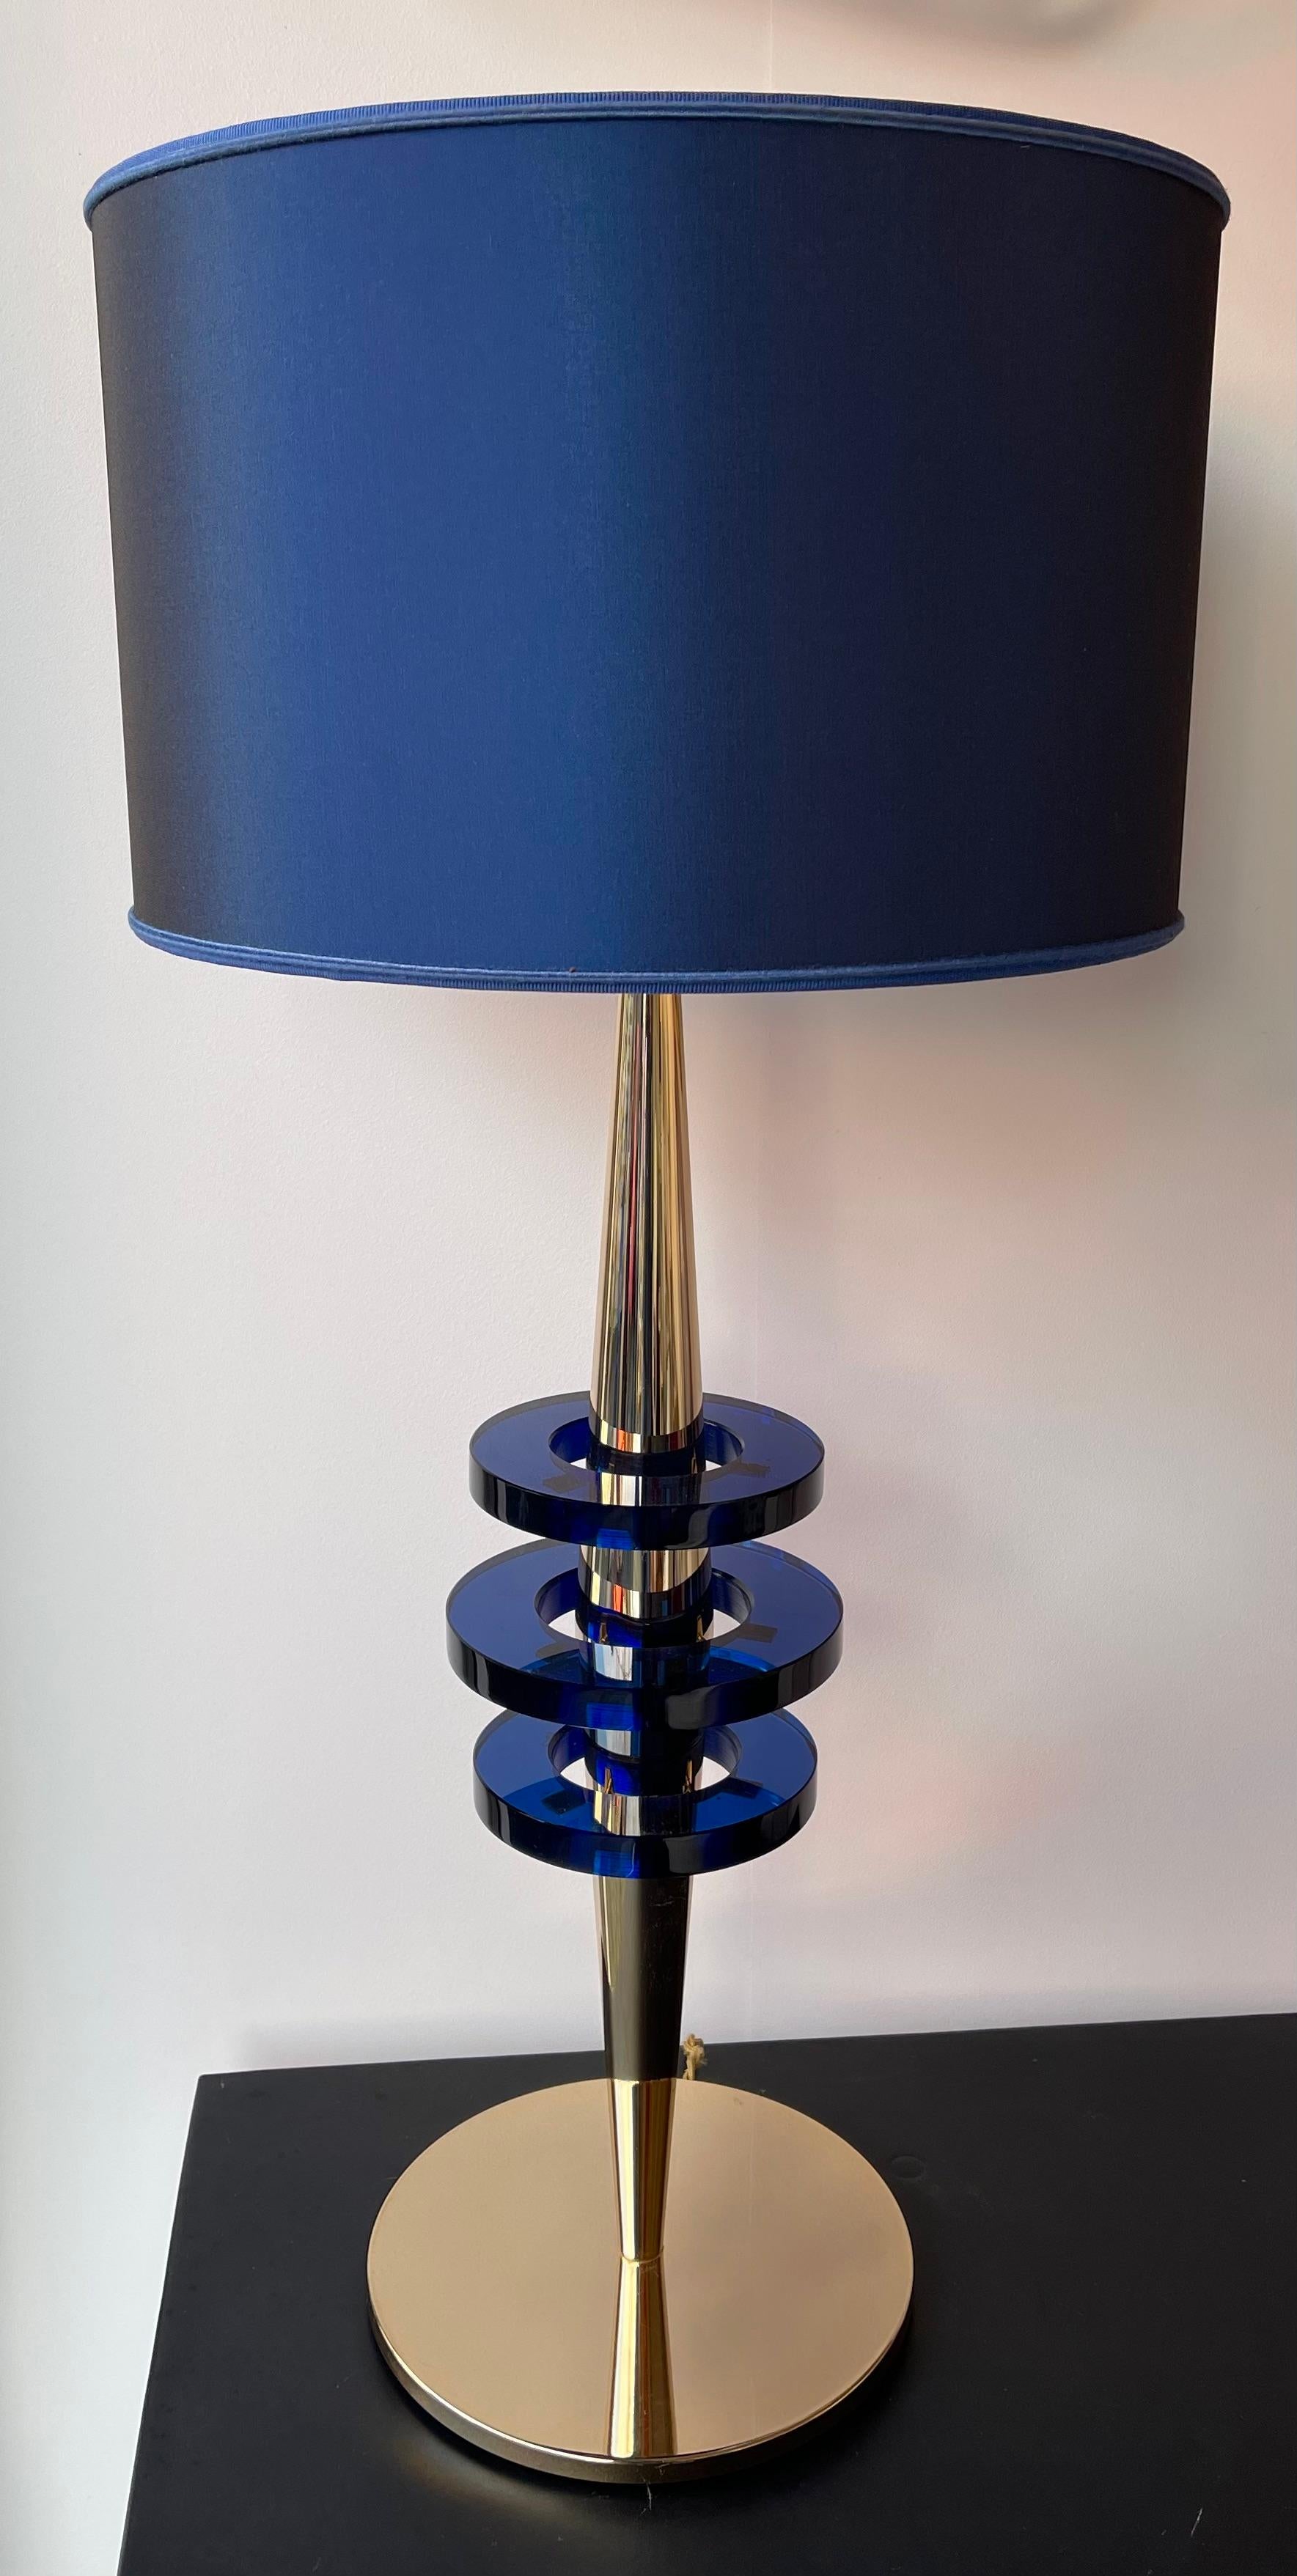 Pair of brass and blue Murano glass disc table or bedside lamps. Contemporary work from a small artisanal italian design workshop. In the mood of Mid-Century Modern, Hollywood Regency, Venini, Mazzega, La Murrina, Veronese, Barovier, Fratelli Toso,